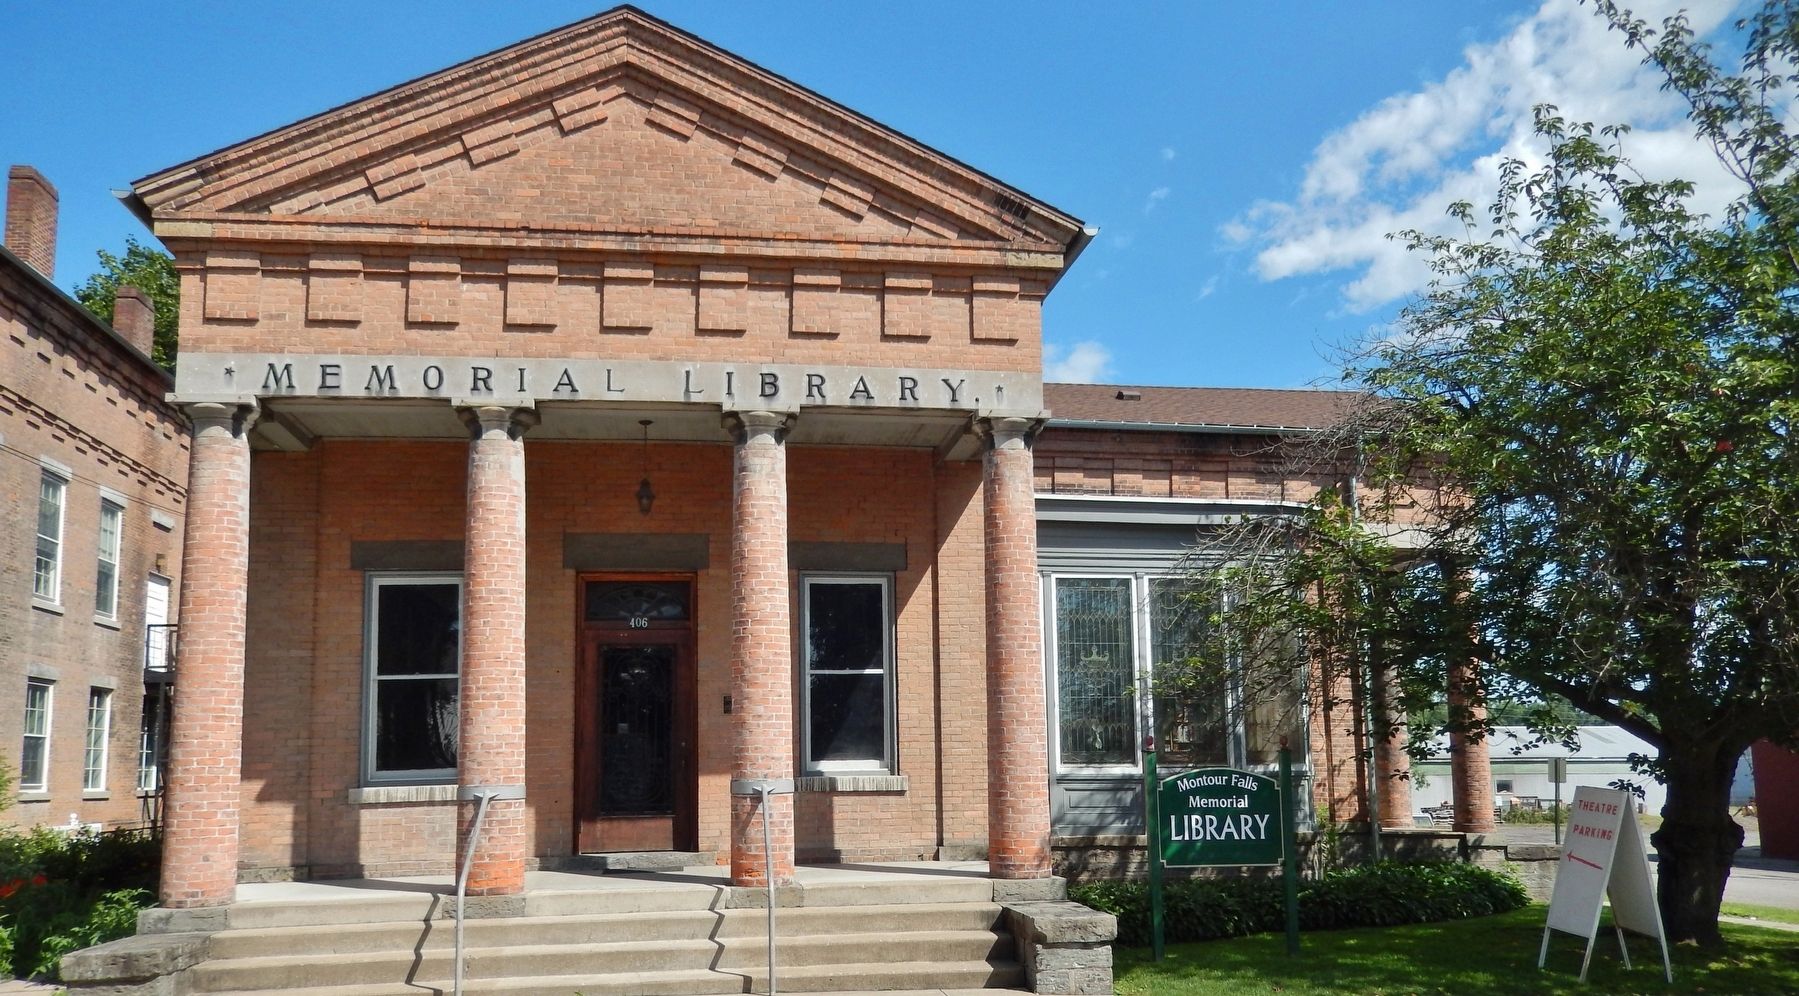 Montour Falls Memorial Library (<i>front portico; marker partially visible just right of door</i>) image. Click for full size.